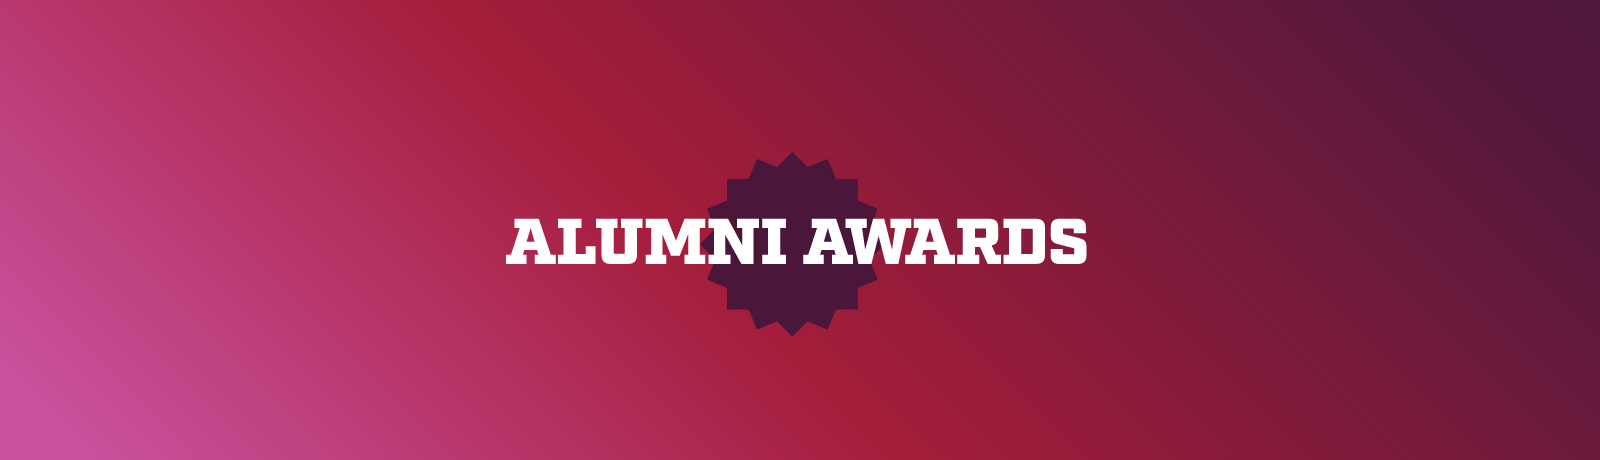 Alumni awards spelled out on a maroon background with an image of a gear